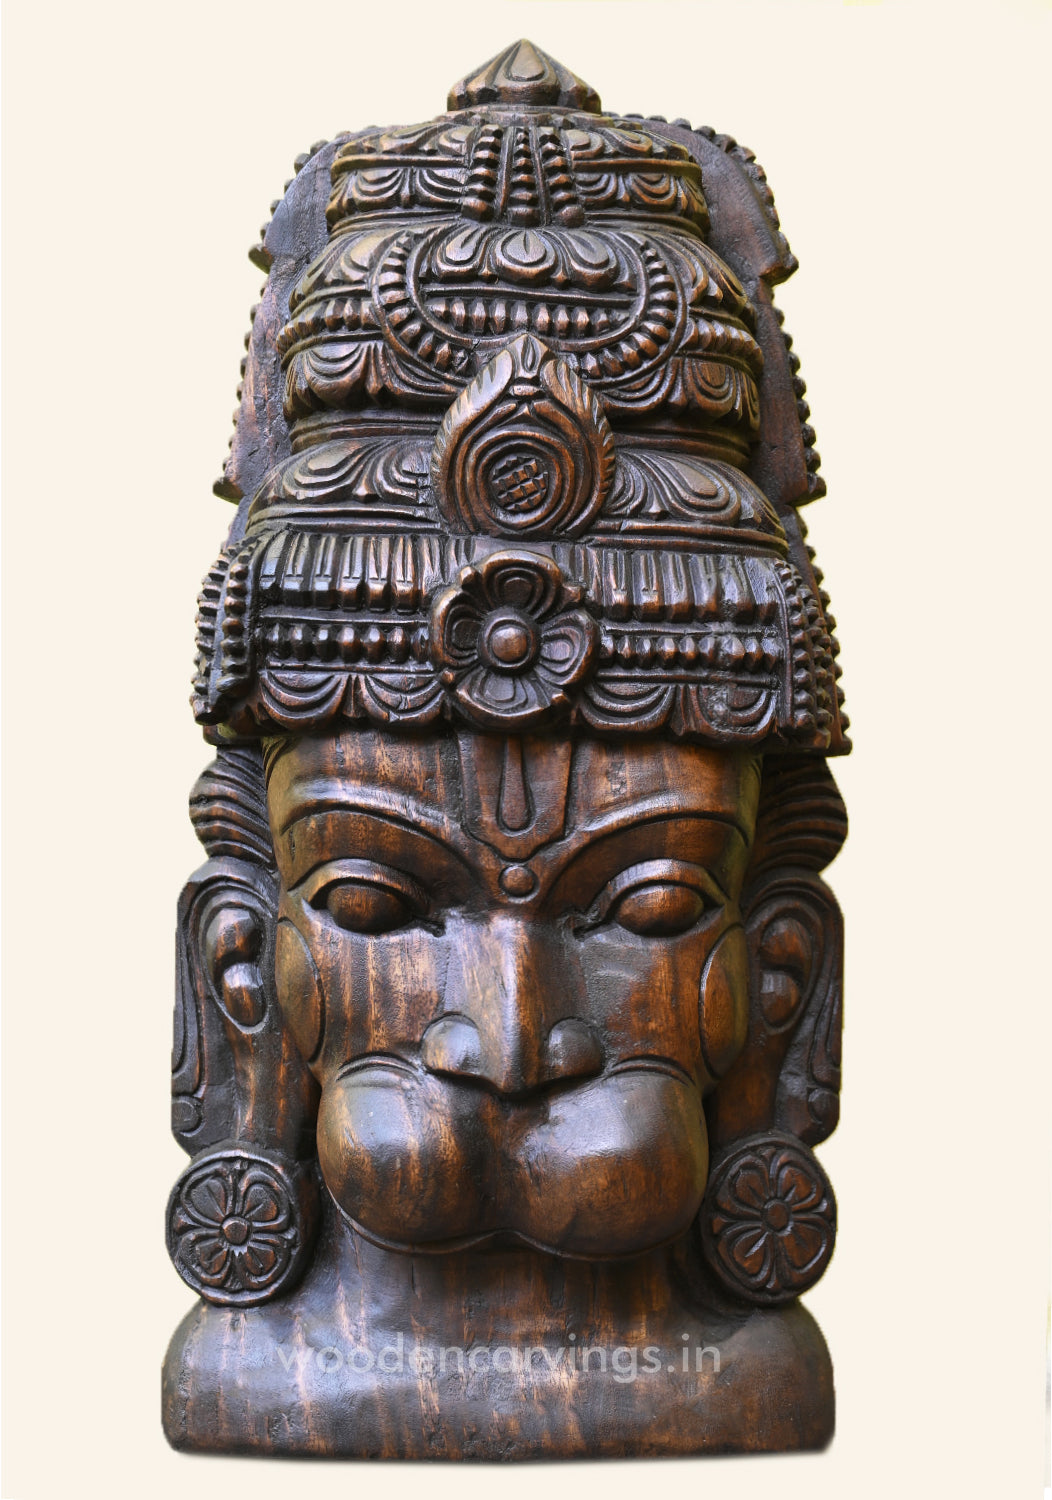 Mask of Wooden Lord Hanuman Detaily Handmade Hooks Fixed Wall Mount 25"